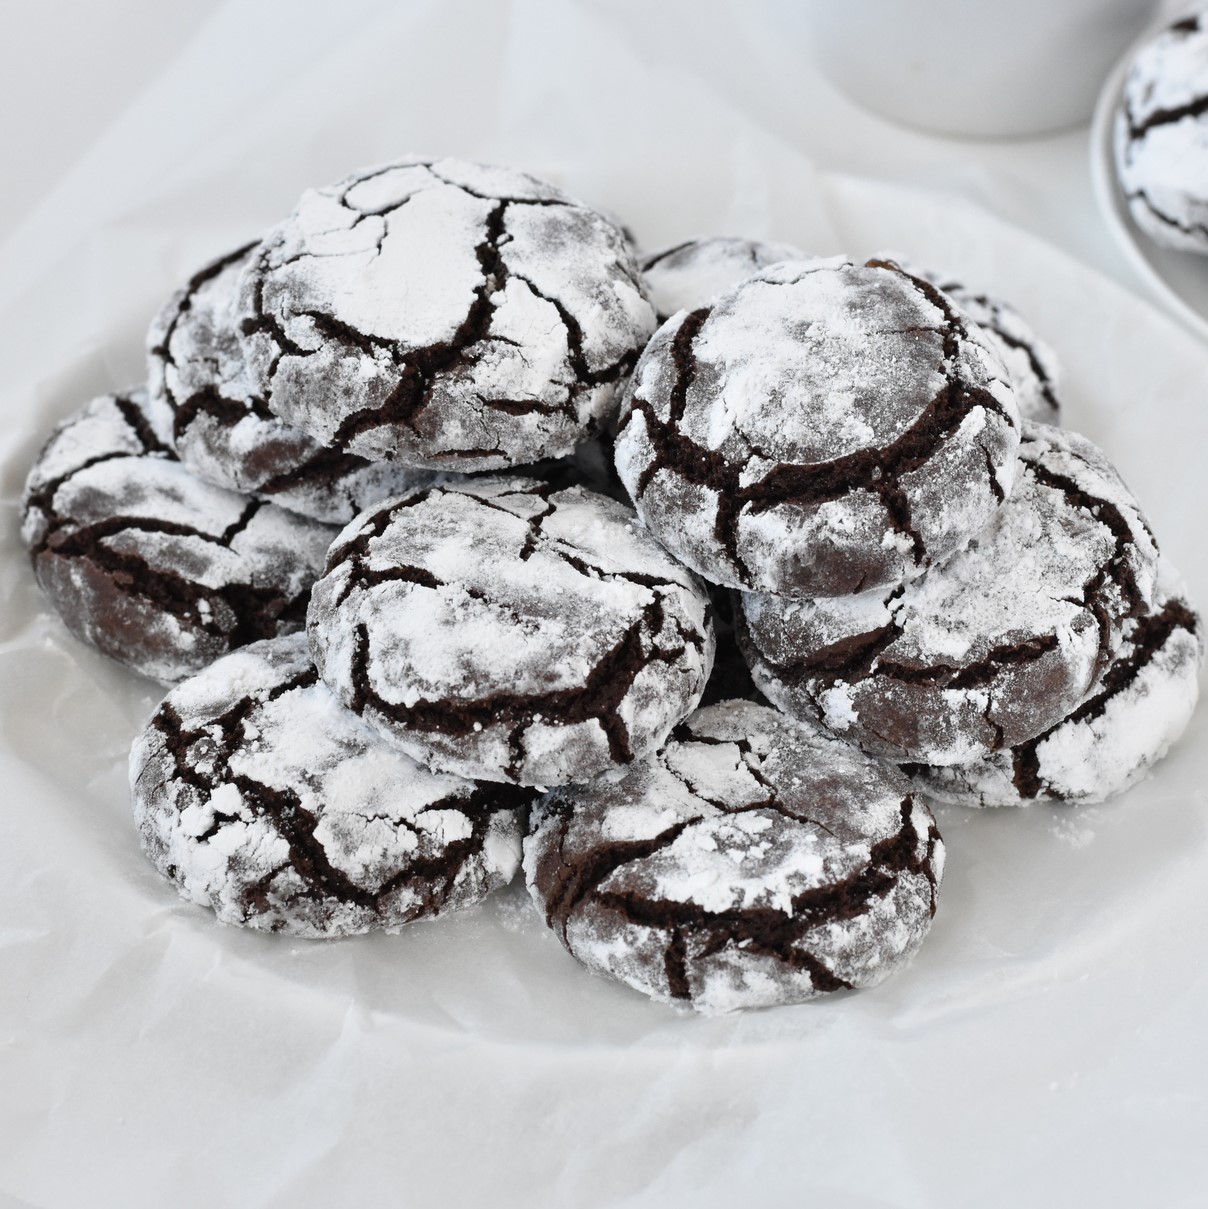 Chocolate crinkle cookies stacked in a pile.